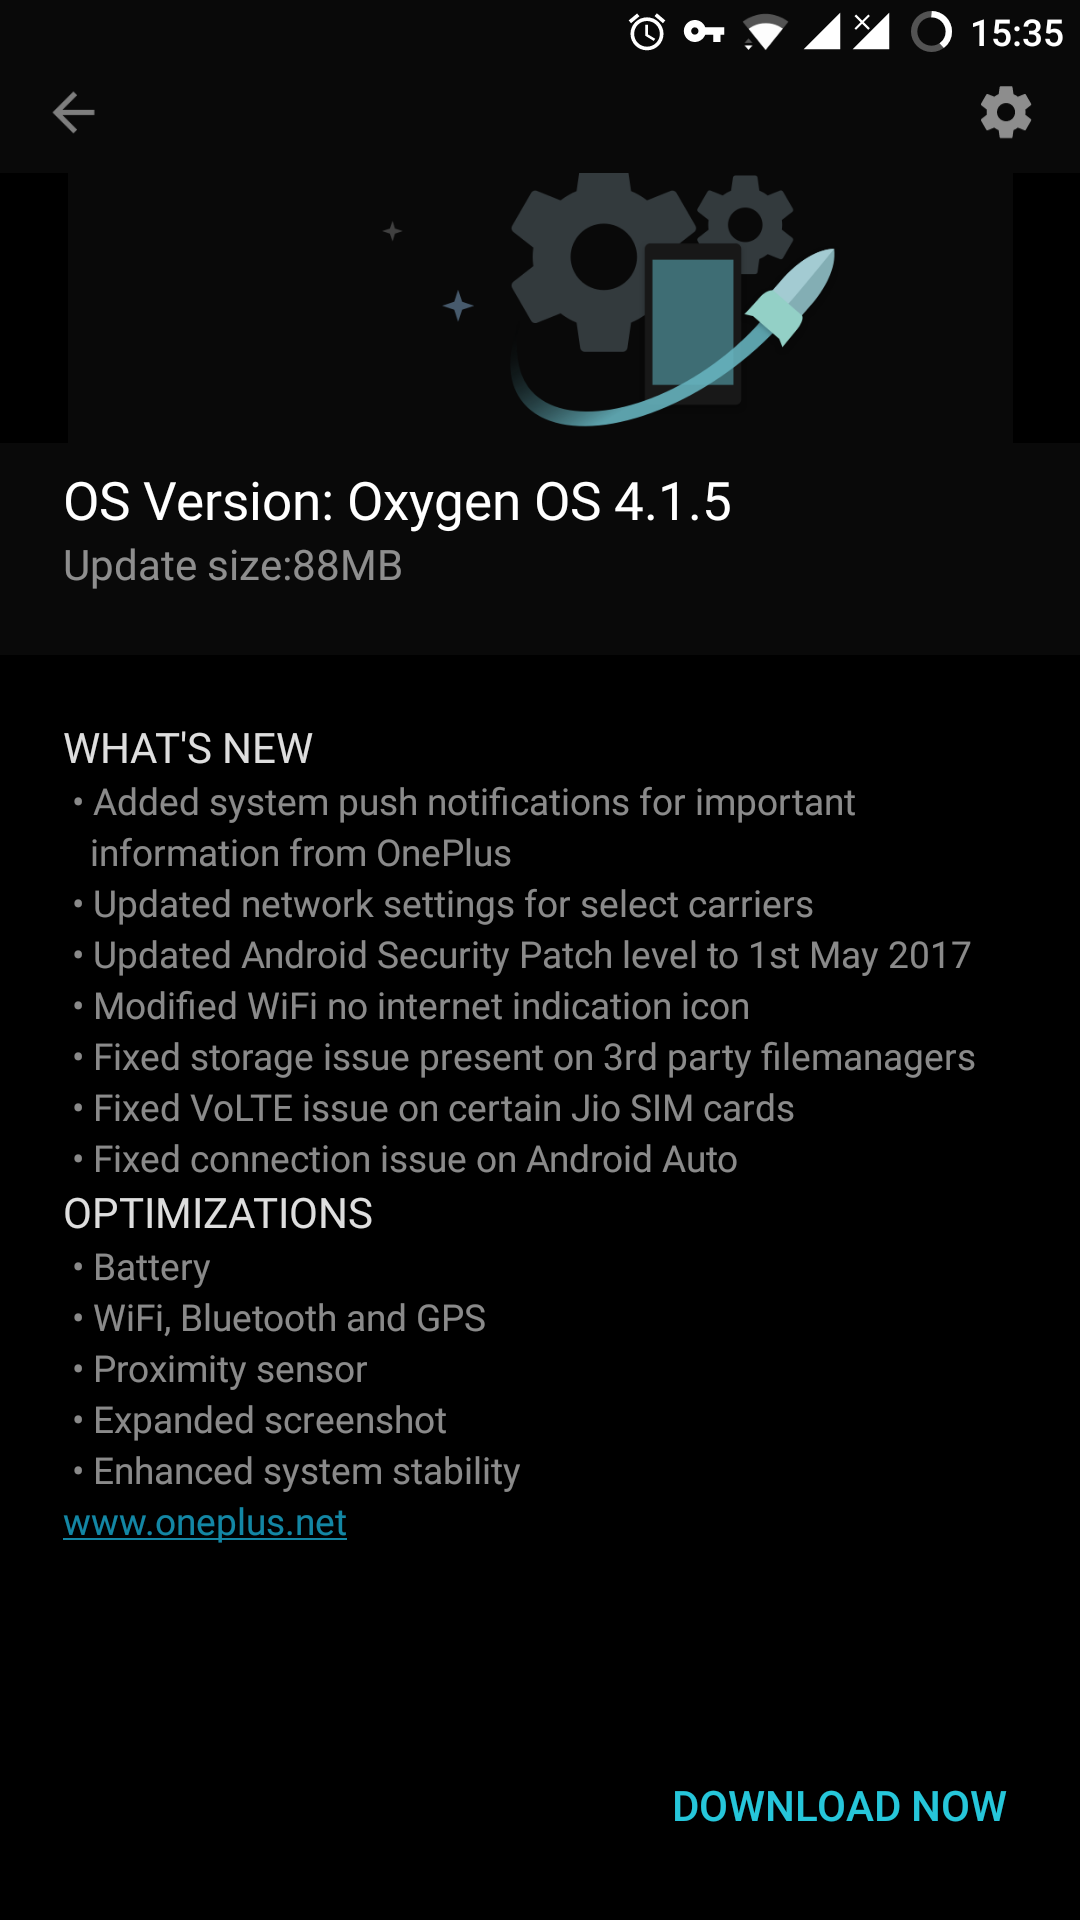 oneplus 3 and 3t starts receiving oxygenos 4.1.5 update